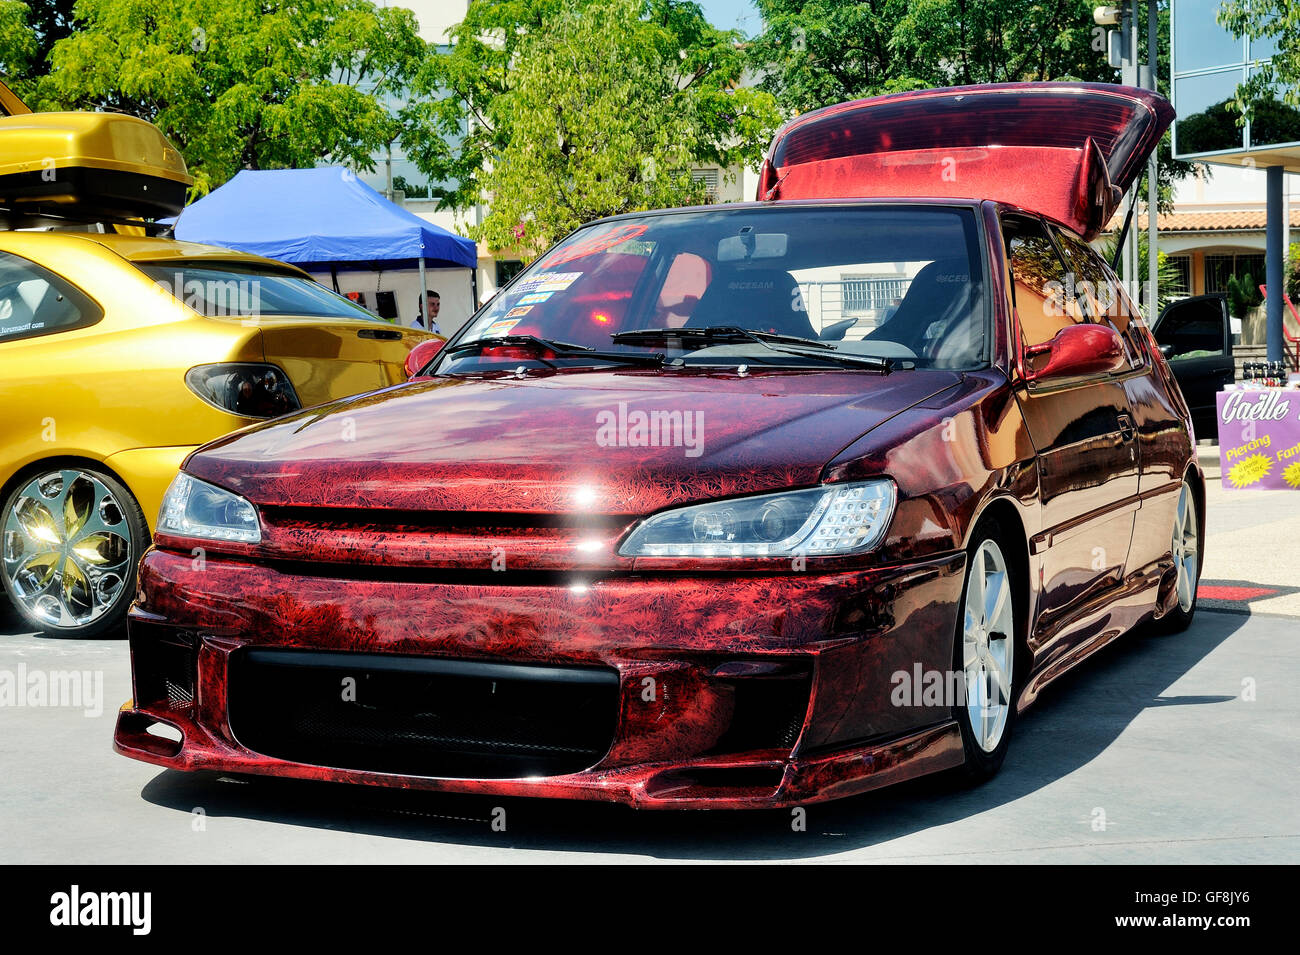 https://c8.alamy.com/comp/GF8JY6/car-tuning-exhibition-in-saint-christole-les-ales-in-the-french-department-GF8JY6.jpg